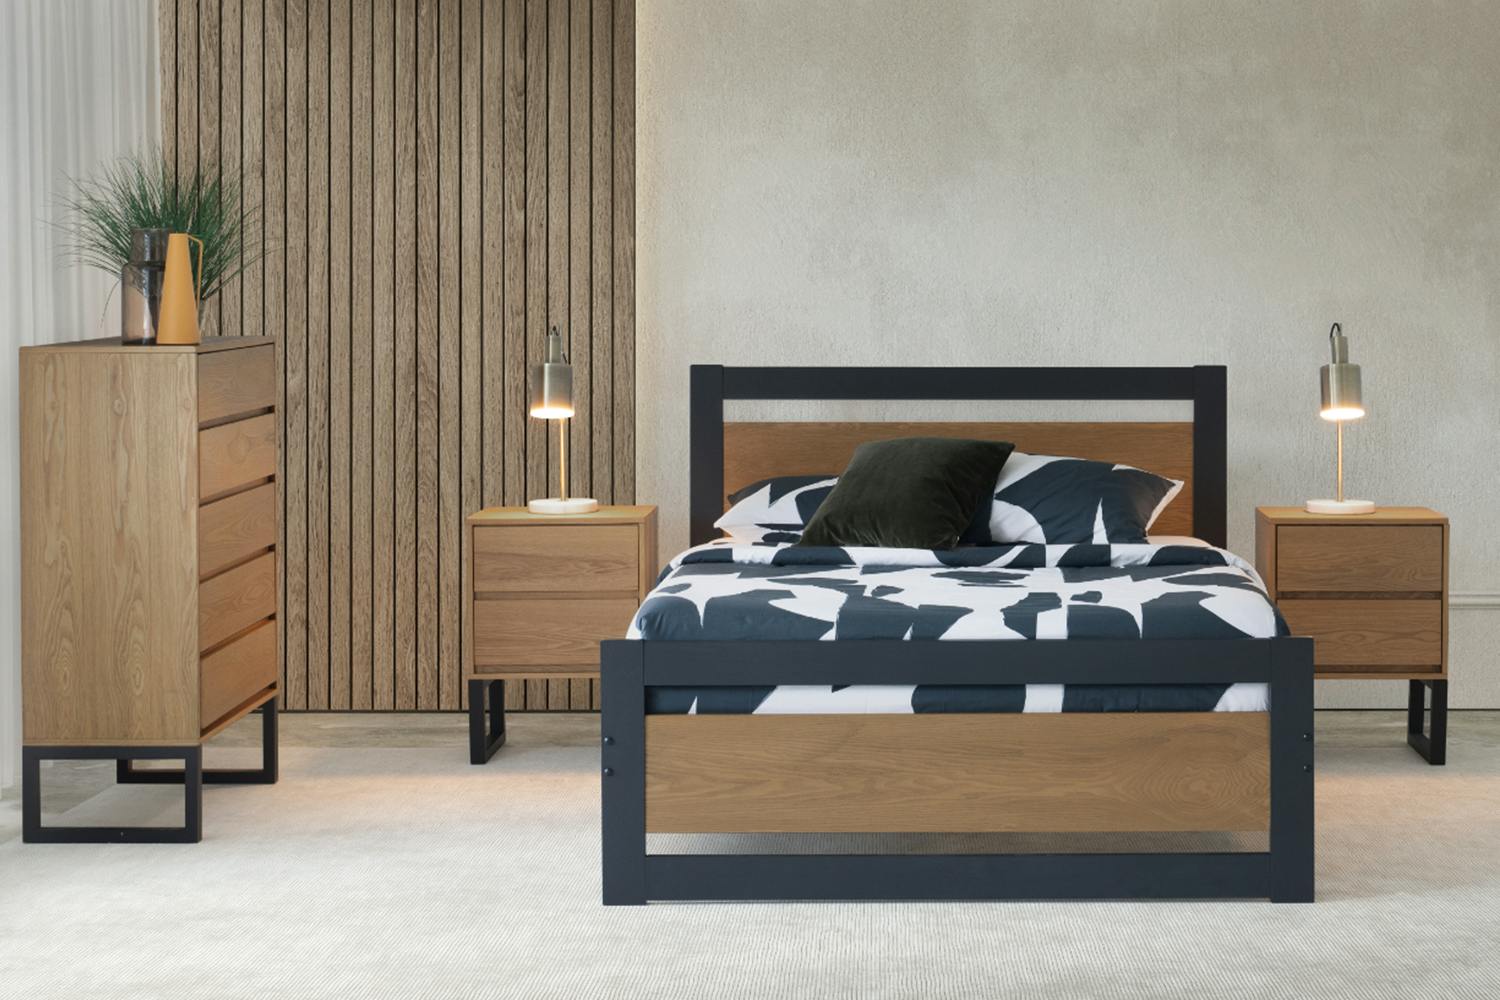 Alexis Bed Frame | Small Double | 4ft | Ash Charcoal & Wood